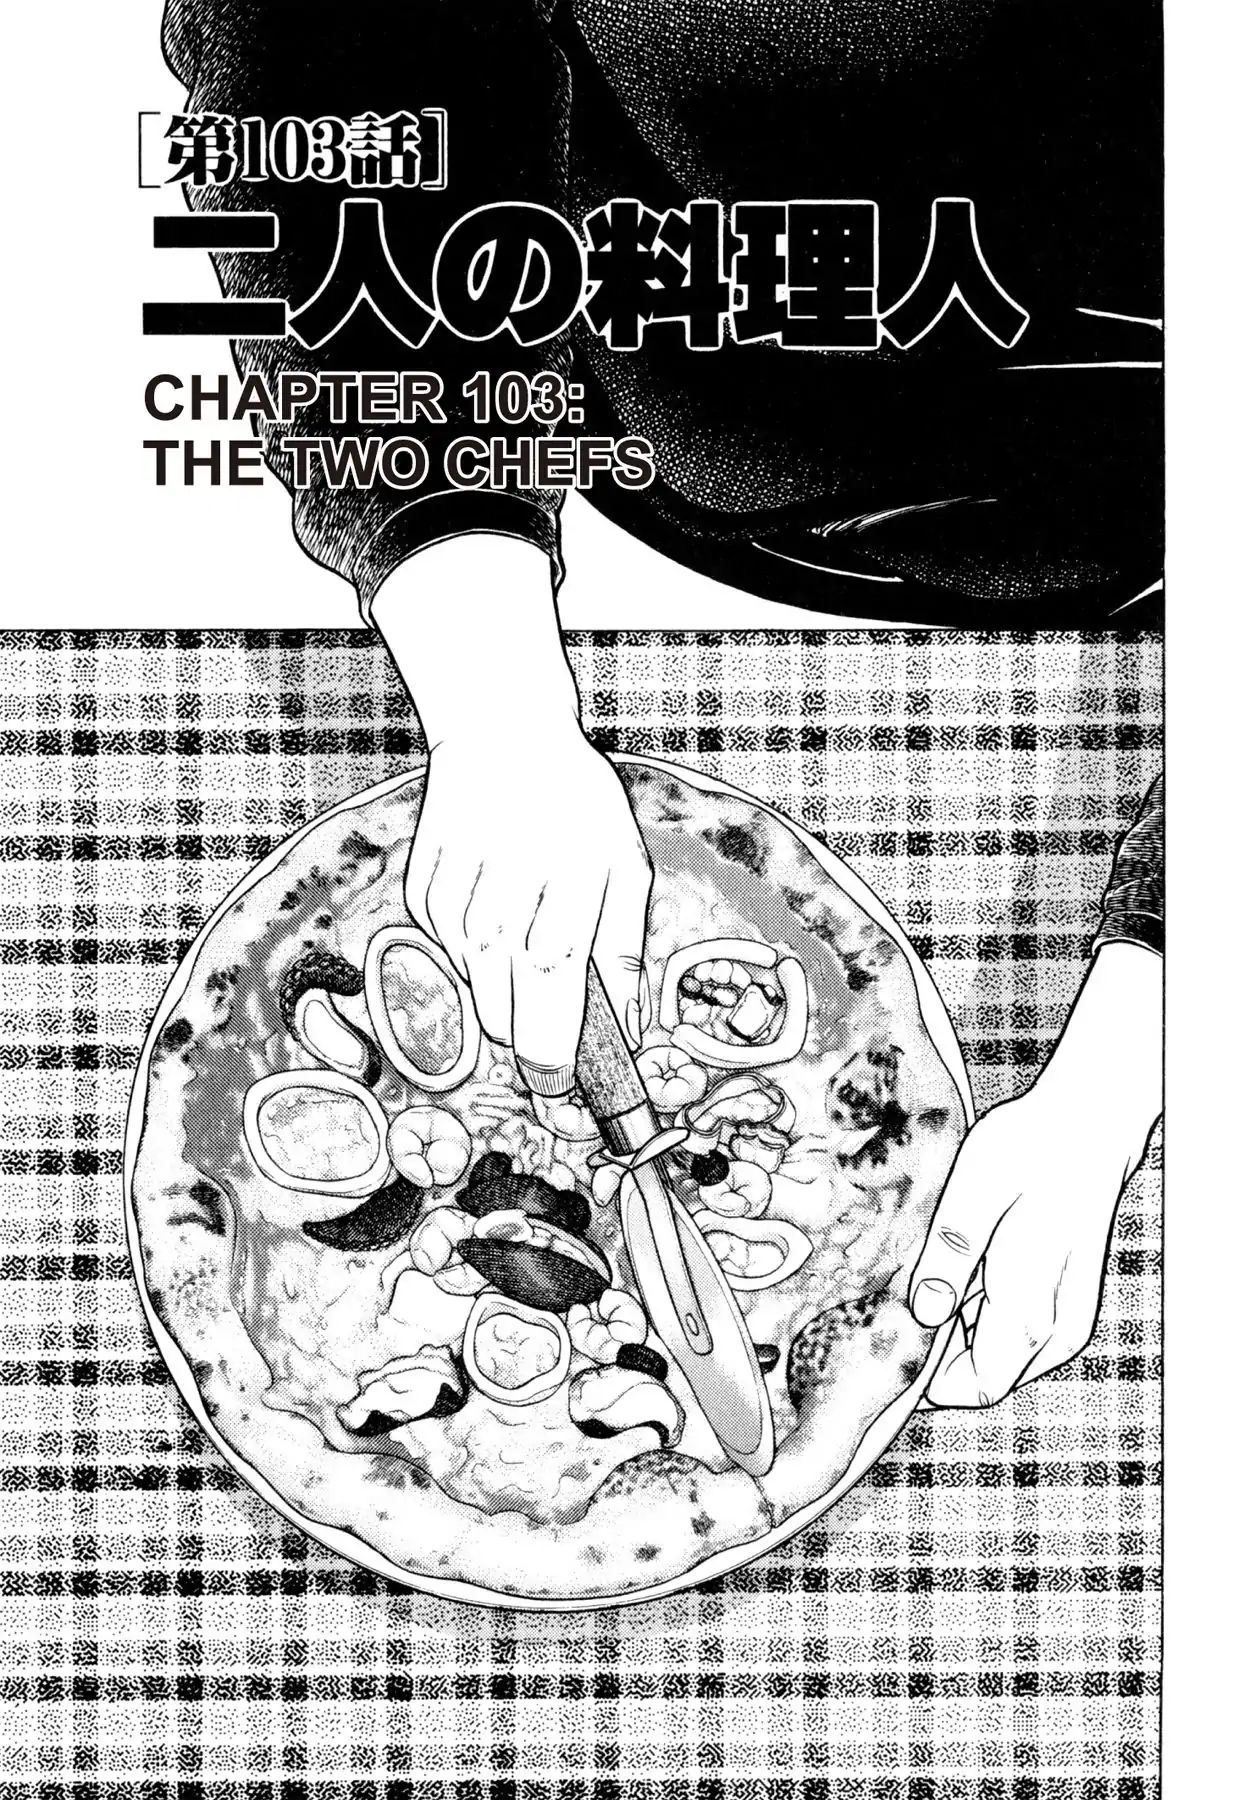 Shoku King VOL.12 CHAPTER 103: THE TWO CHEFS